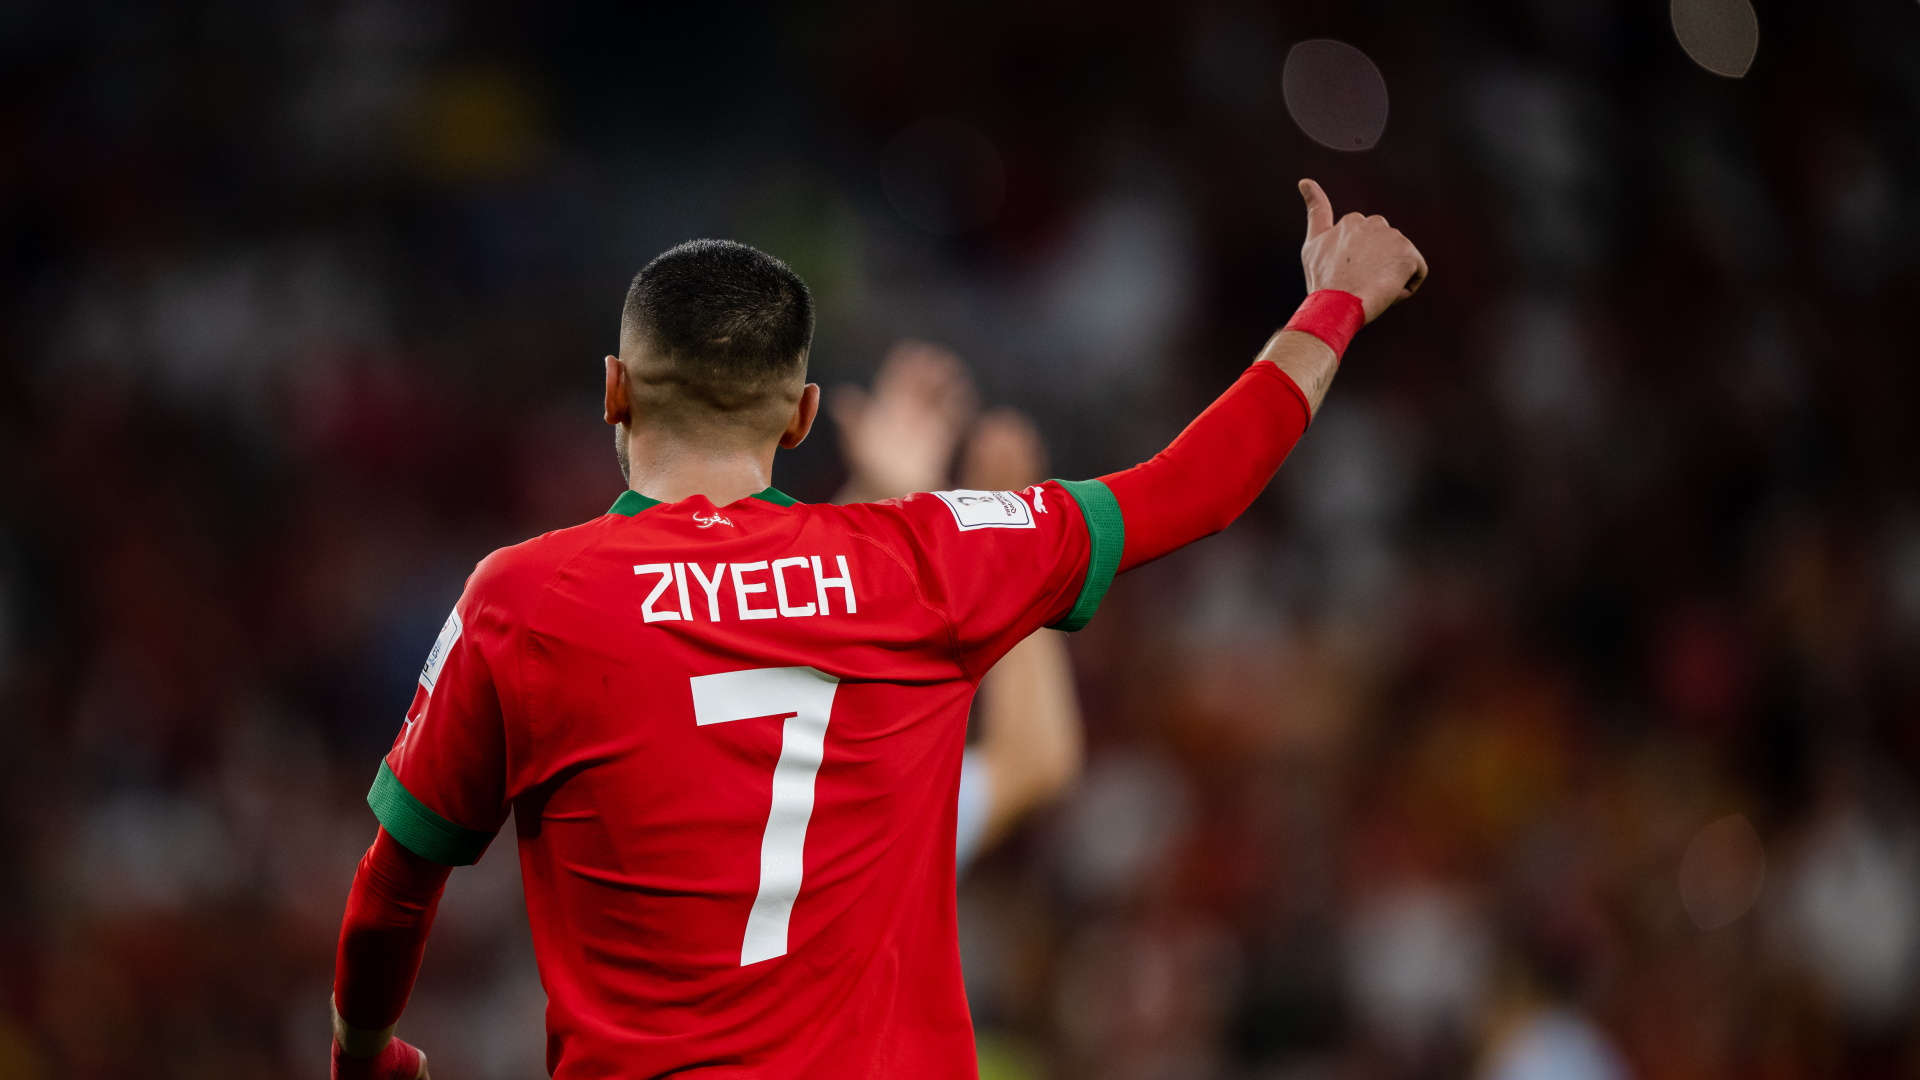 Hakim Ziyech has been one of the main reasons behind Morocco’s success in the World Cup, and Milan chased after him for multiple windows.